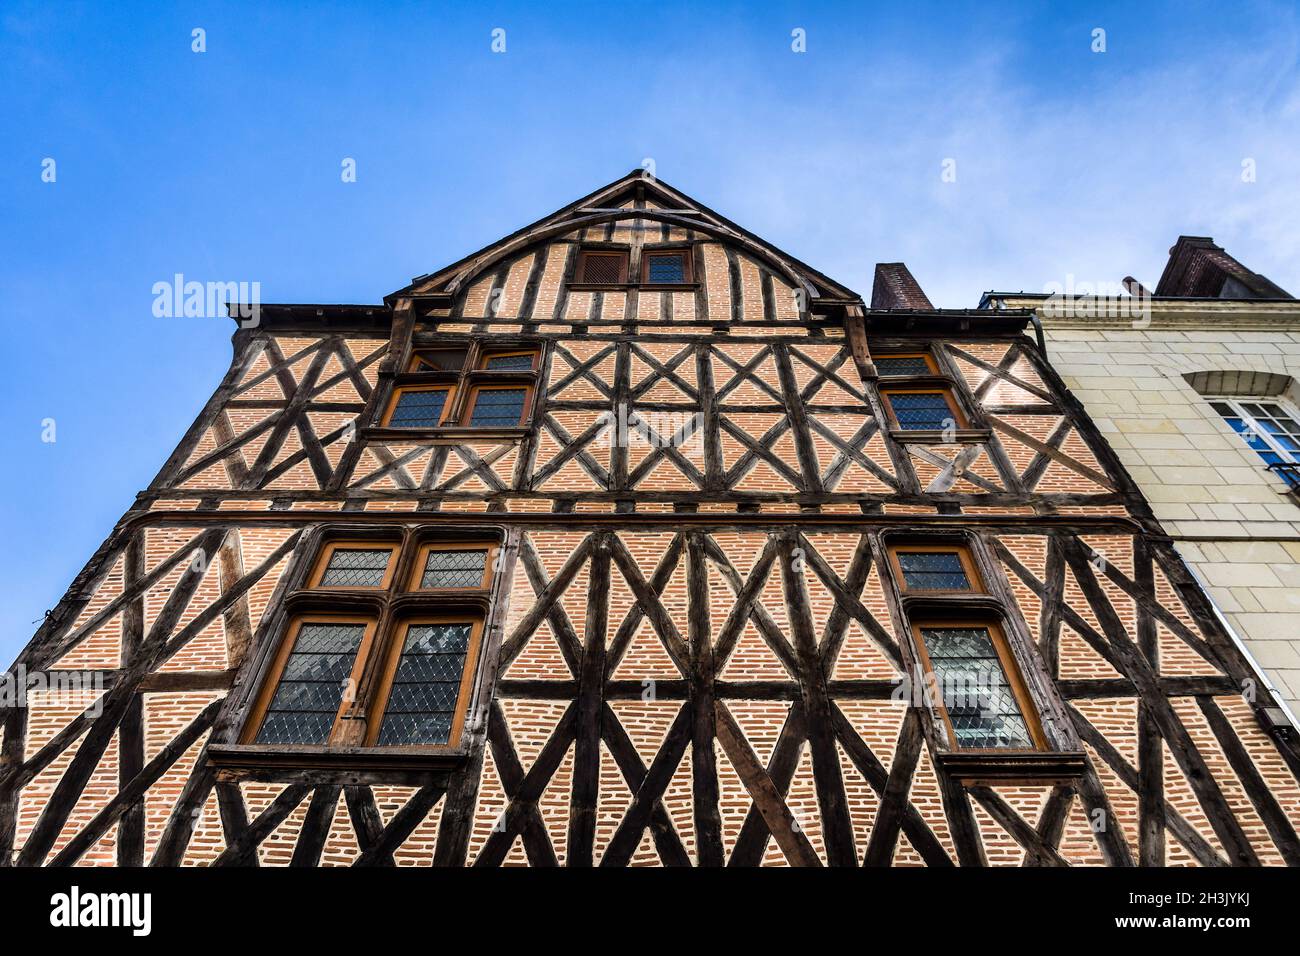 Old 17th century traditional timber-framed building - Tours, Indre-et-Loire (37), France. Stock Photo